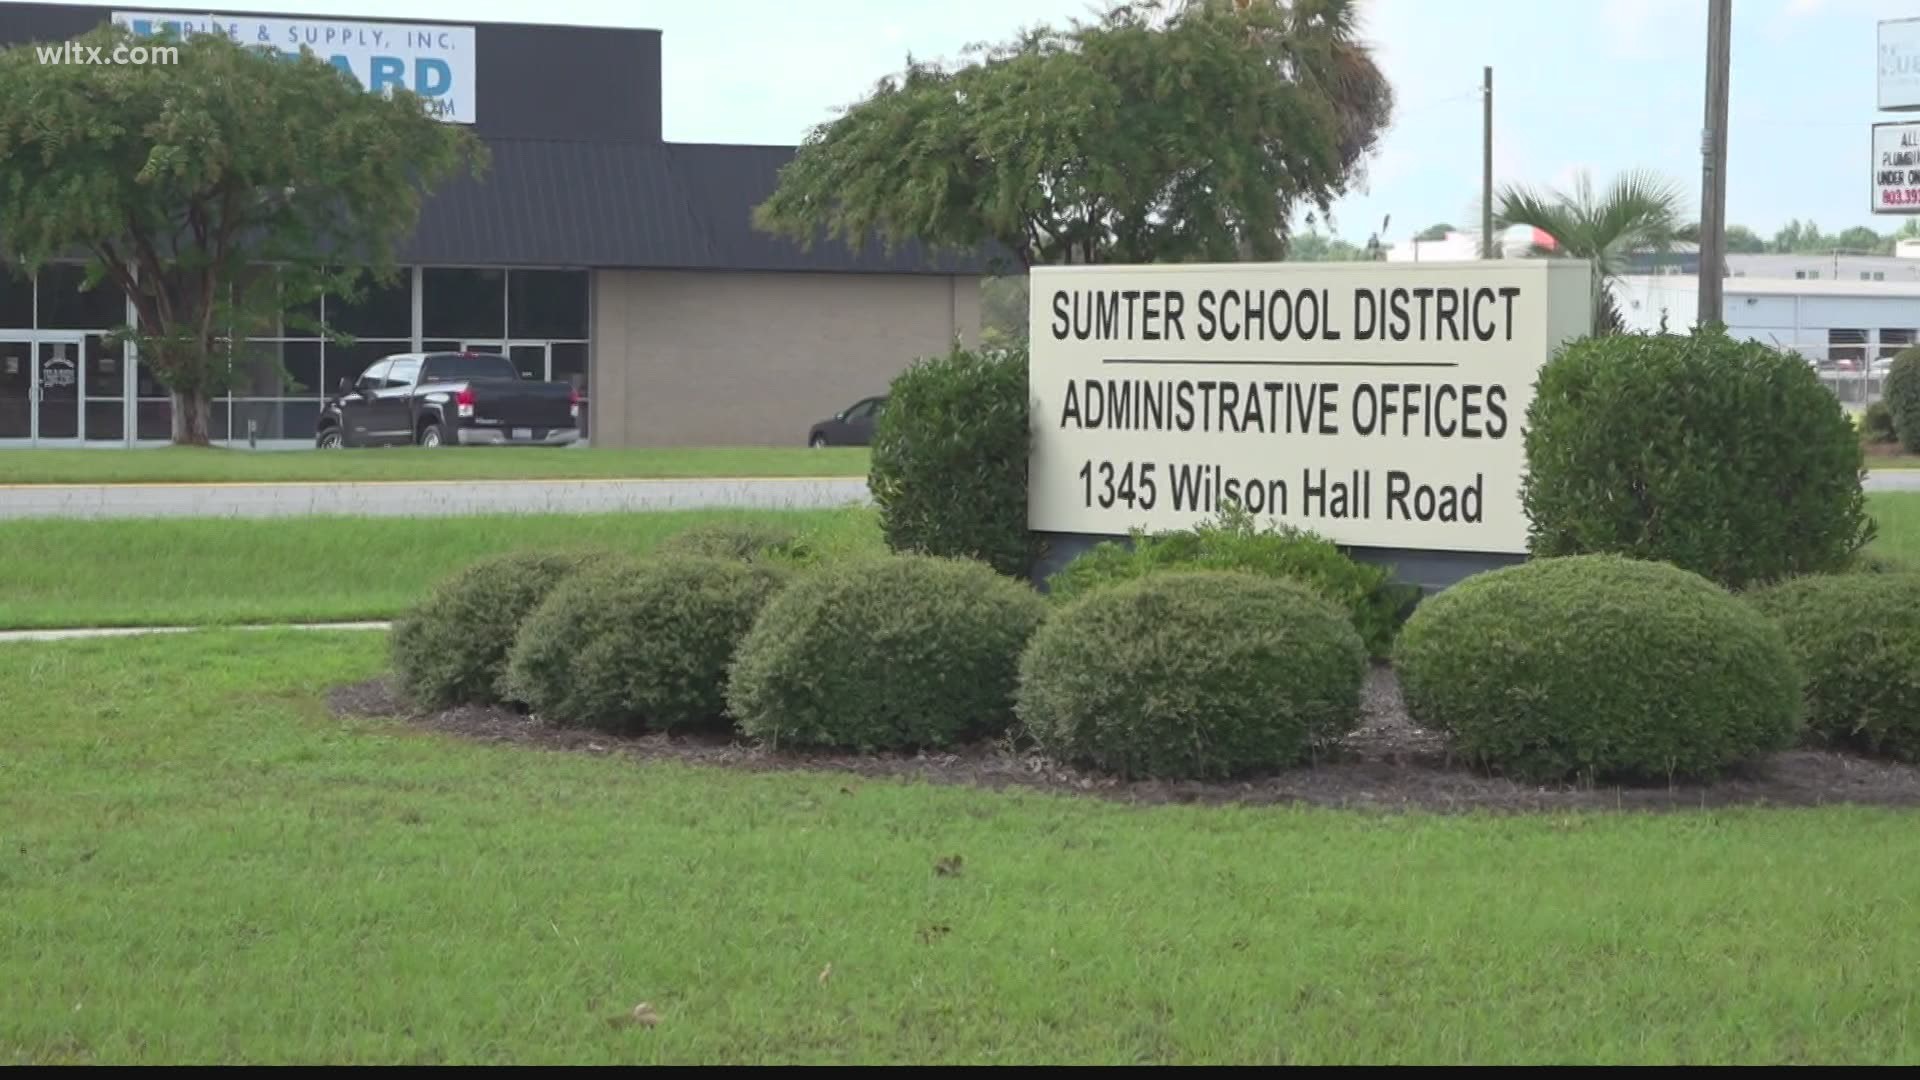 Sumter County public schools will continue virtual learning through the end of January due to COVID-19, according to officials.